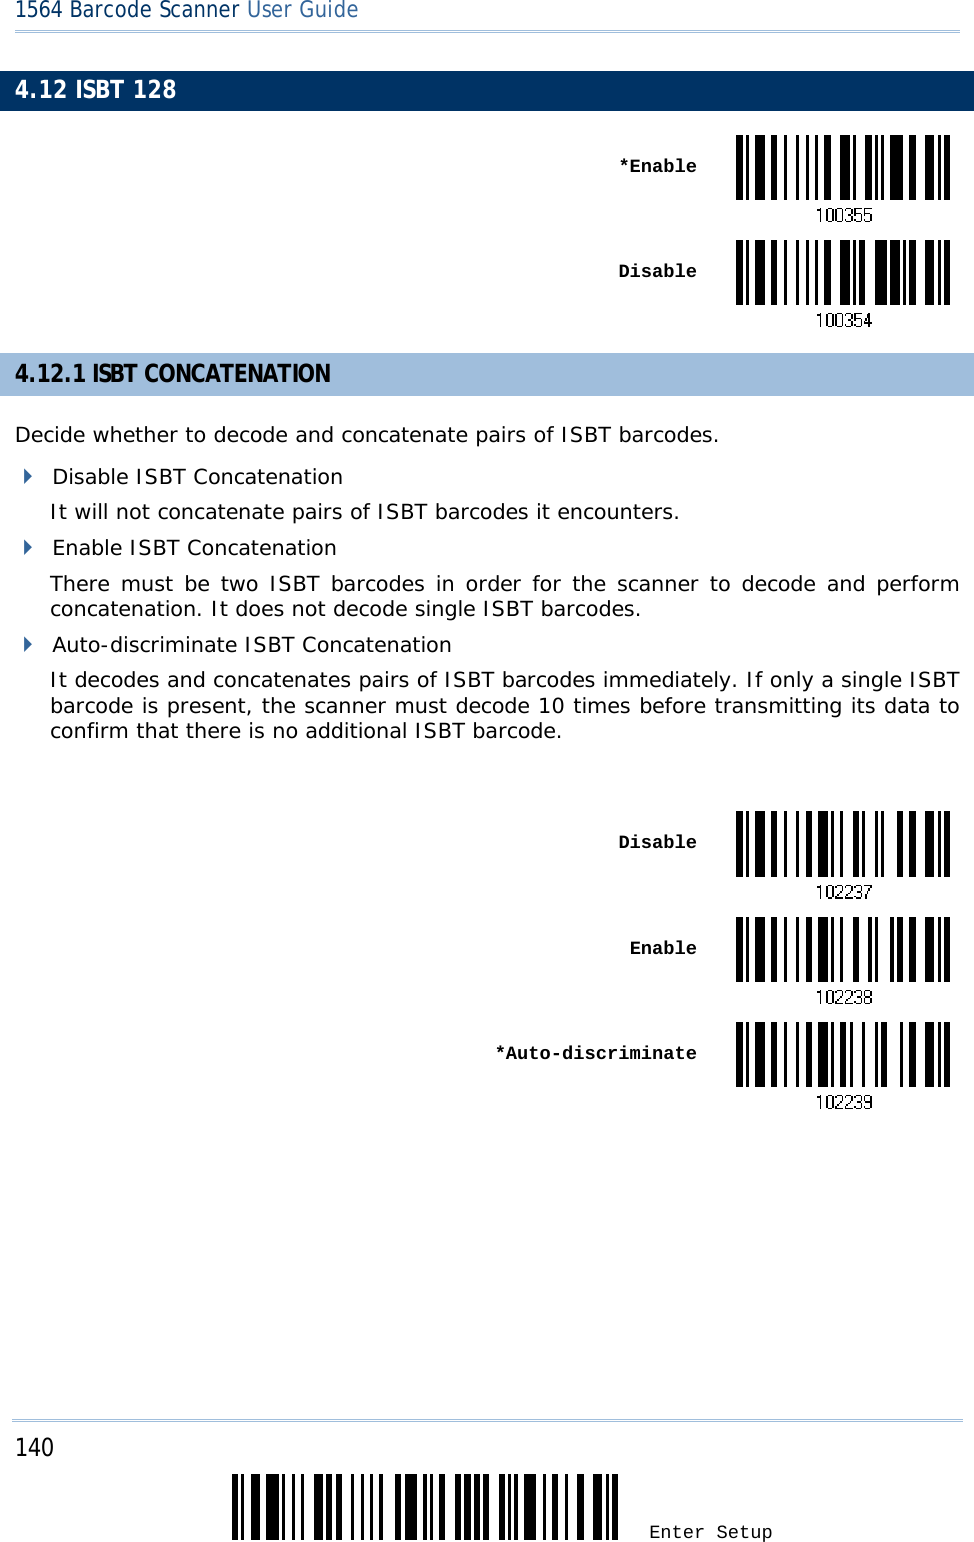 140 Enter Setup 1564 Barcode Scanner User Guide  4.12 ISBT 128  *Enable Disable4.12.1 ISBT CONCATENATION Decide whether to decode and concatenate pairs of ISBT barcodes.  Disable ISBT Concatenation It will not concatenate pairs of ISBT barcodes it encounters.  Enable ISBT Concatenation There must be two ISBT barcodes in order for the scanner to decode and perform concatenation. It does not decode single ISBT barcodes.  Auto-discriminate ISBT Concatenation It decodes and concatenates pairs of ISBT barcodes immediately. If only a single ISBT barcode is present, the scanner must decode 10 times before transmitting its data to confirm that there is no additional ISBT barcode.   Disable Enable *Auto-discriminate       